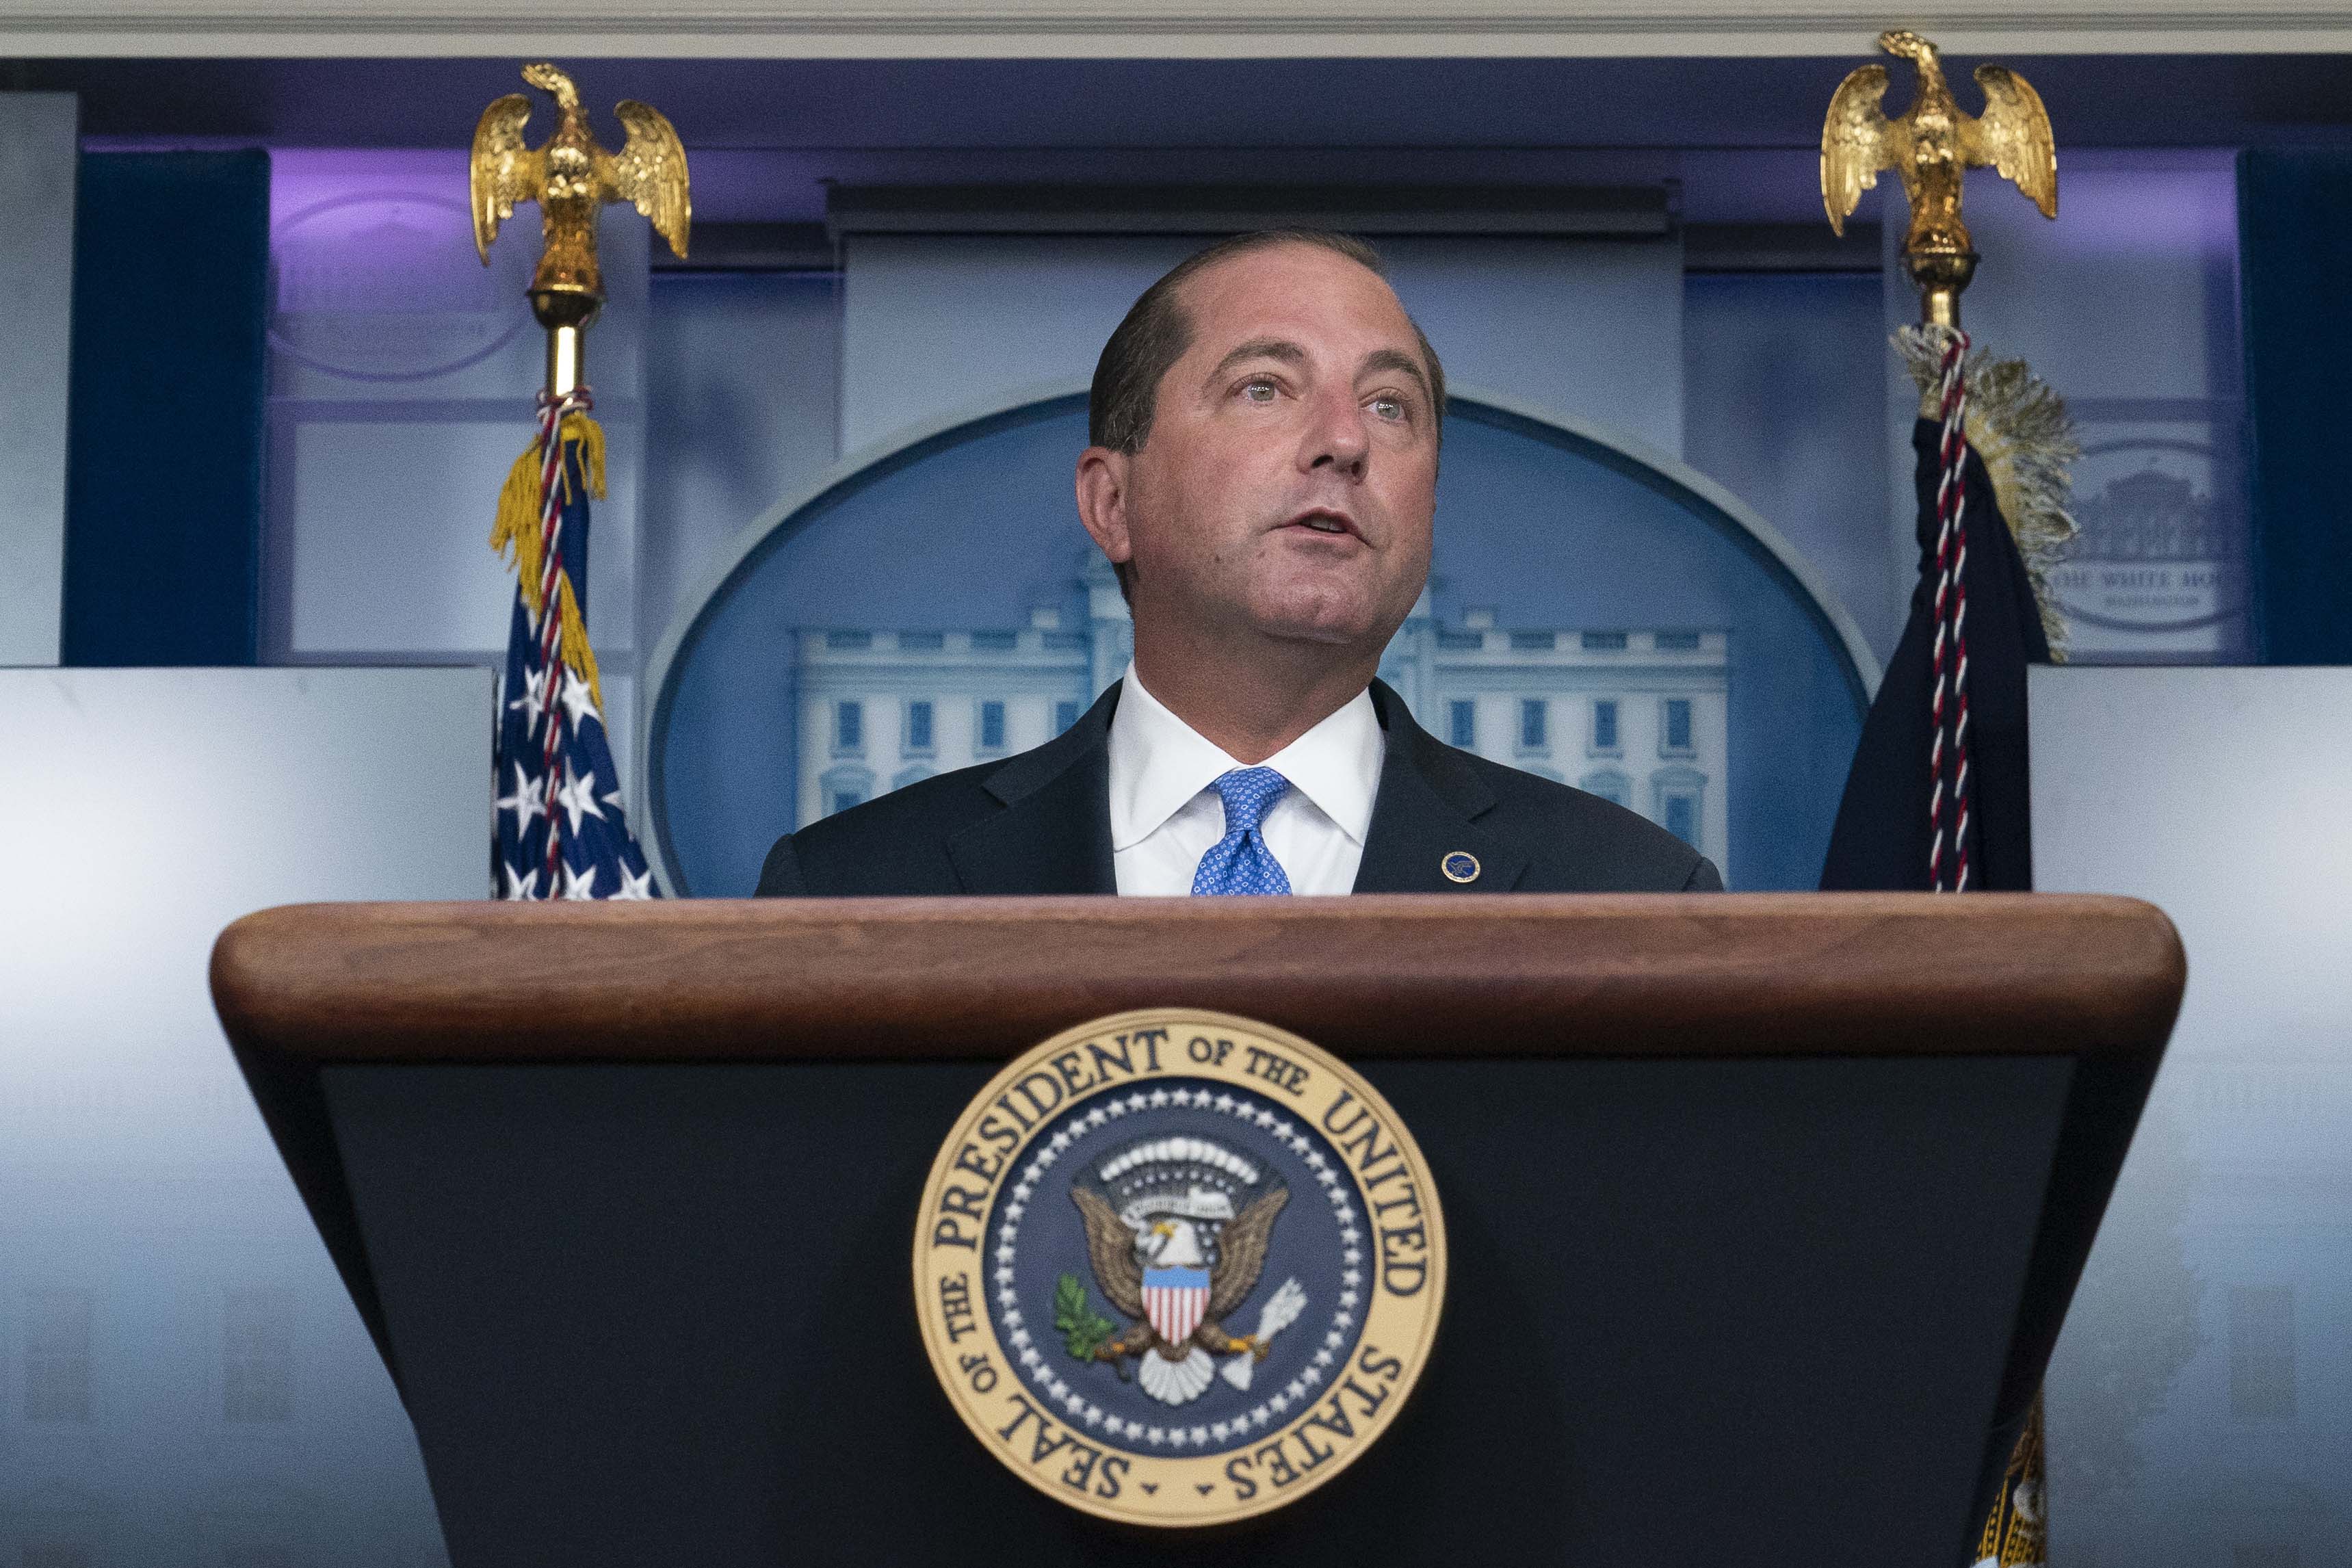 HHS Secretary Alex Azar speaks during a media briefing in the James Brady Briefing Room of the White House, Sunday, Aug. 23, 2020, in Washington. | AP Photo/Alex Brandon